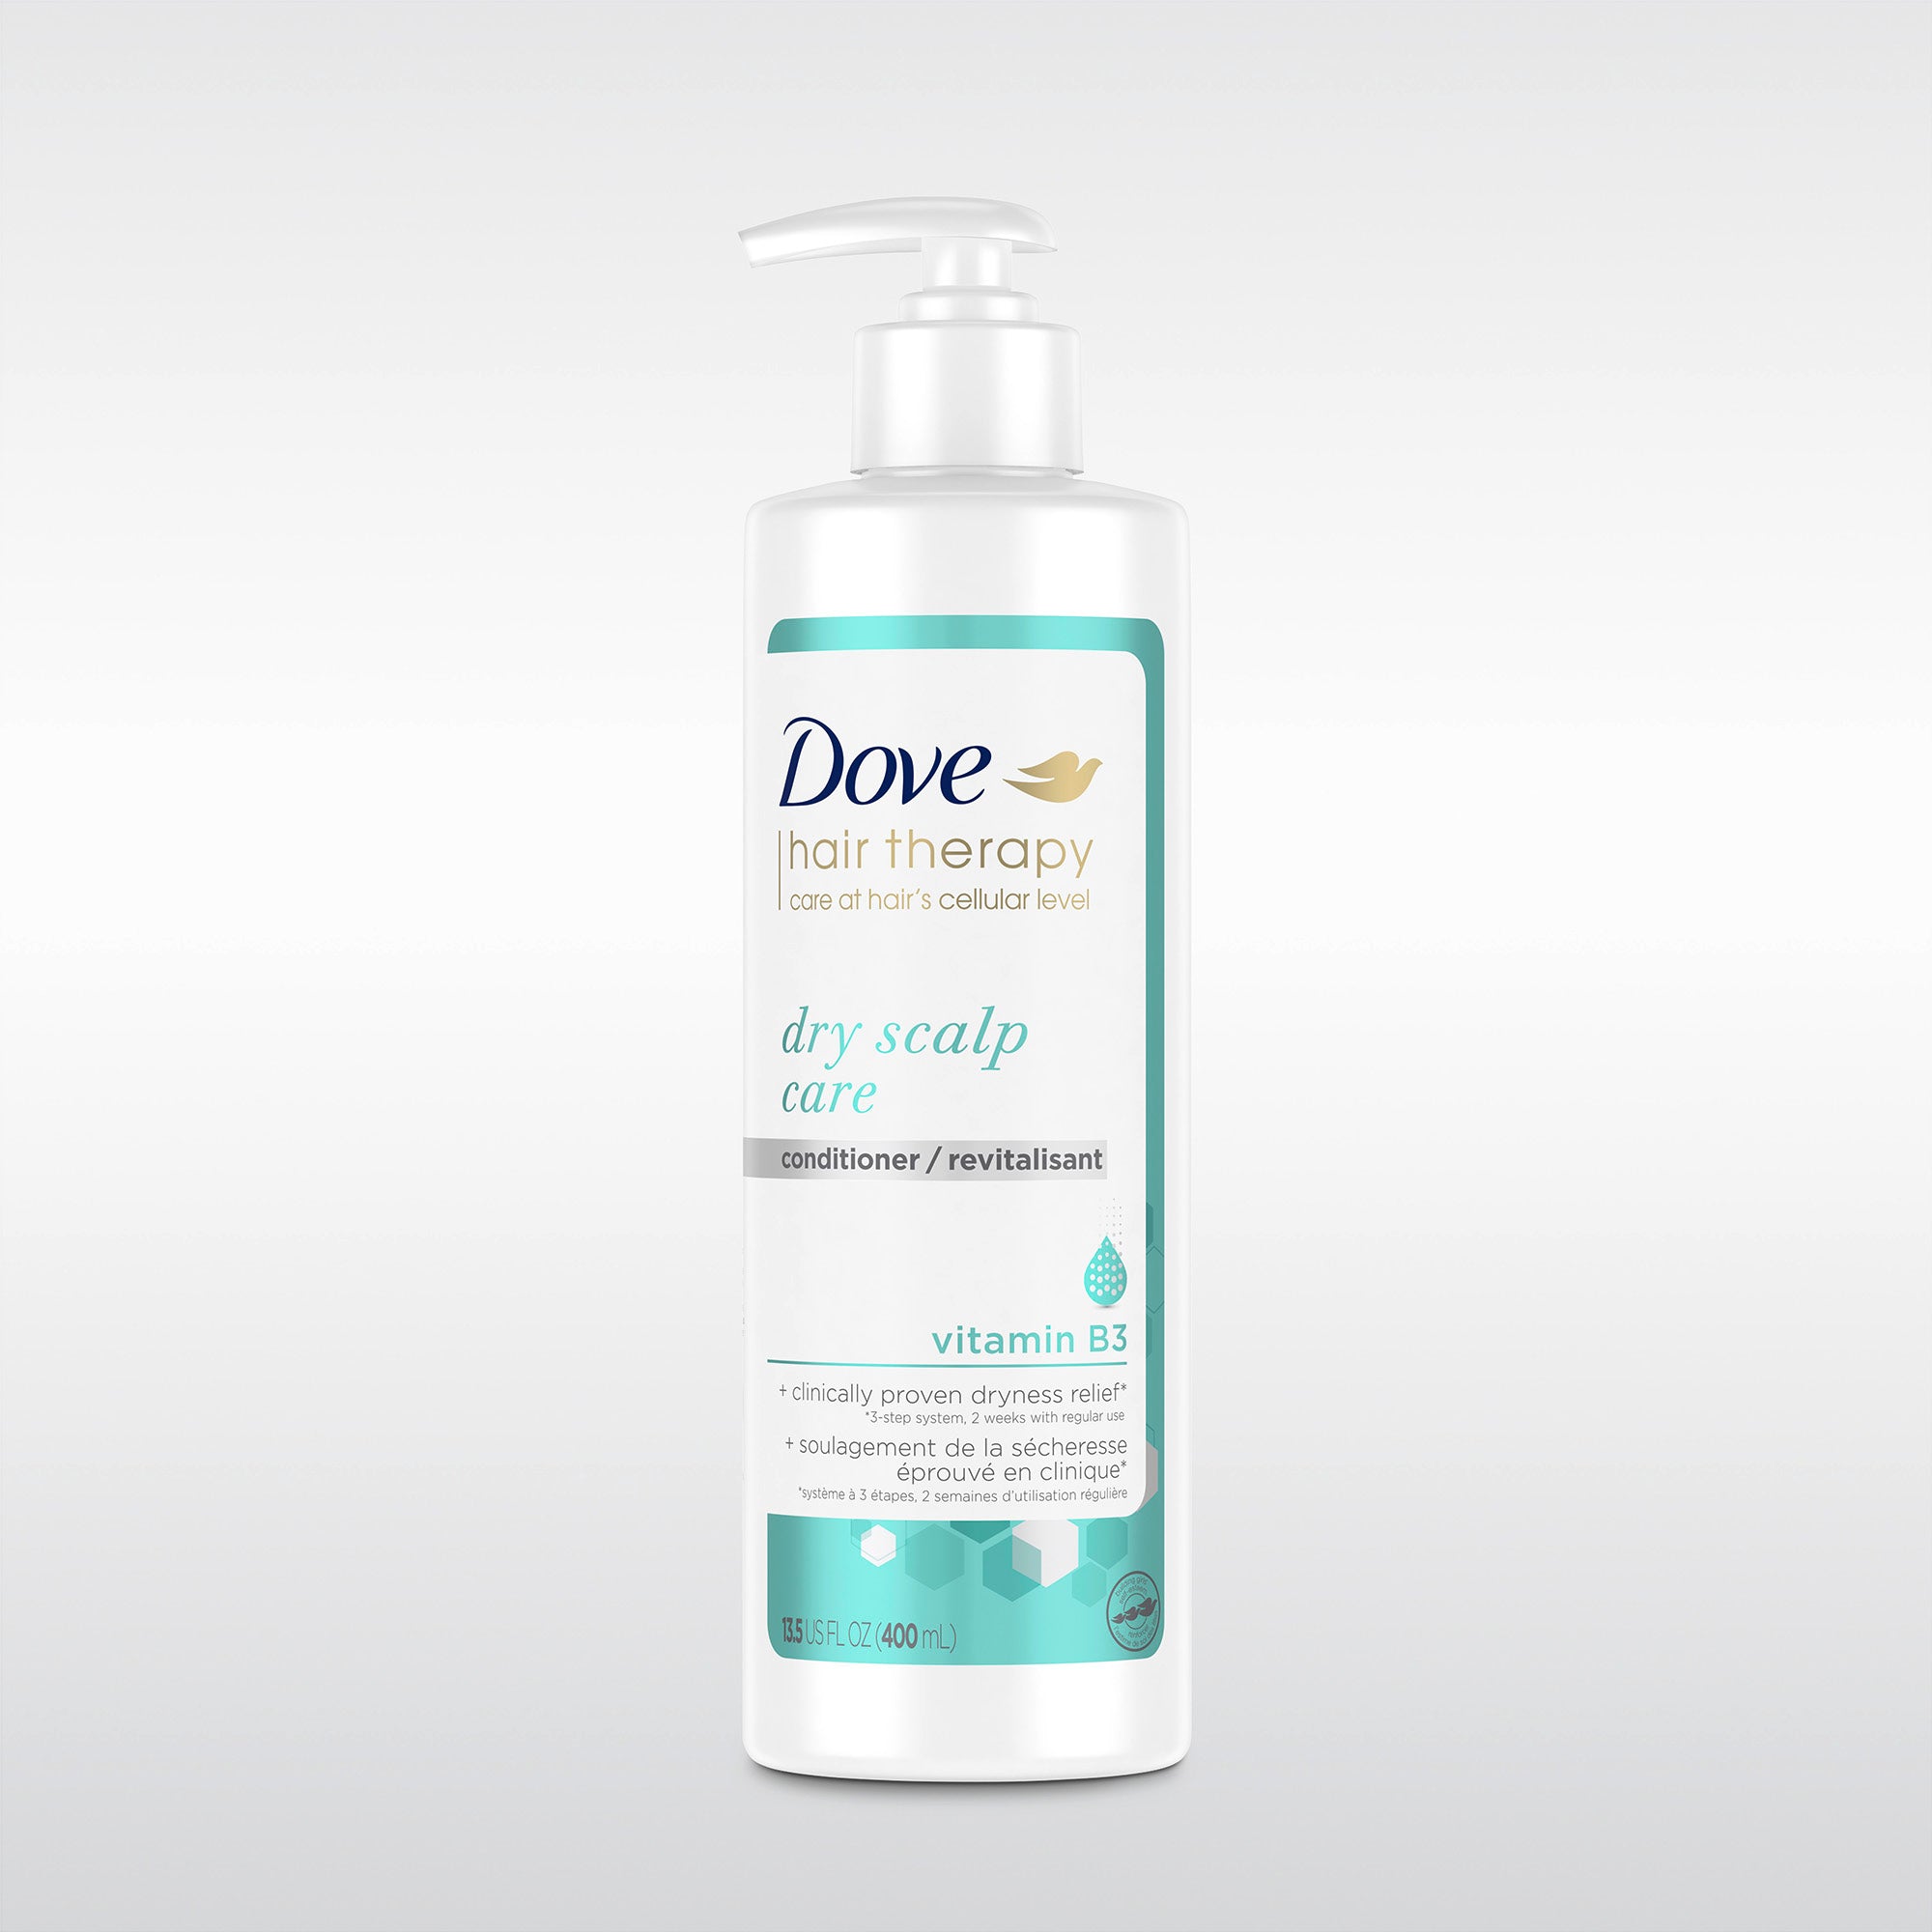 Dove hair therapy dry scalp conditioner